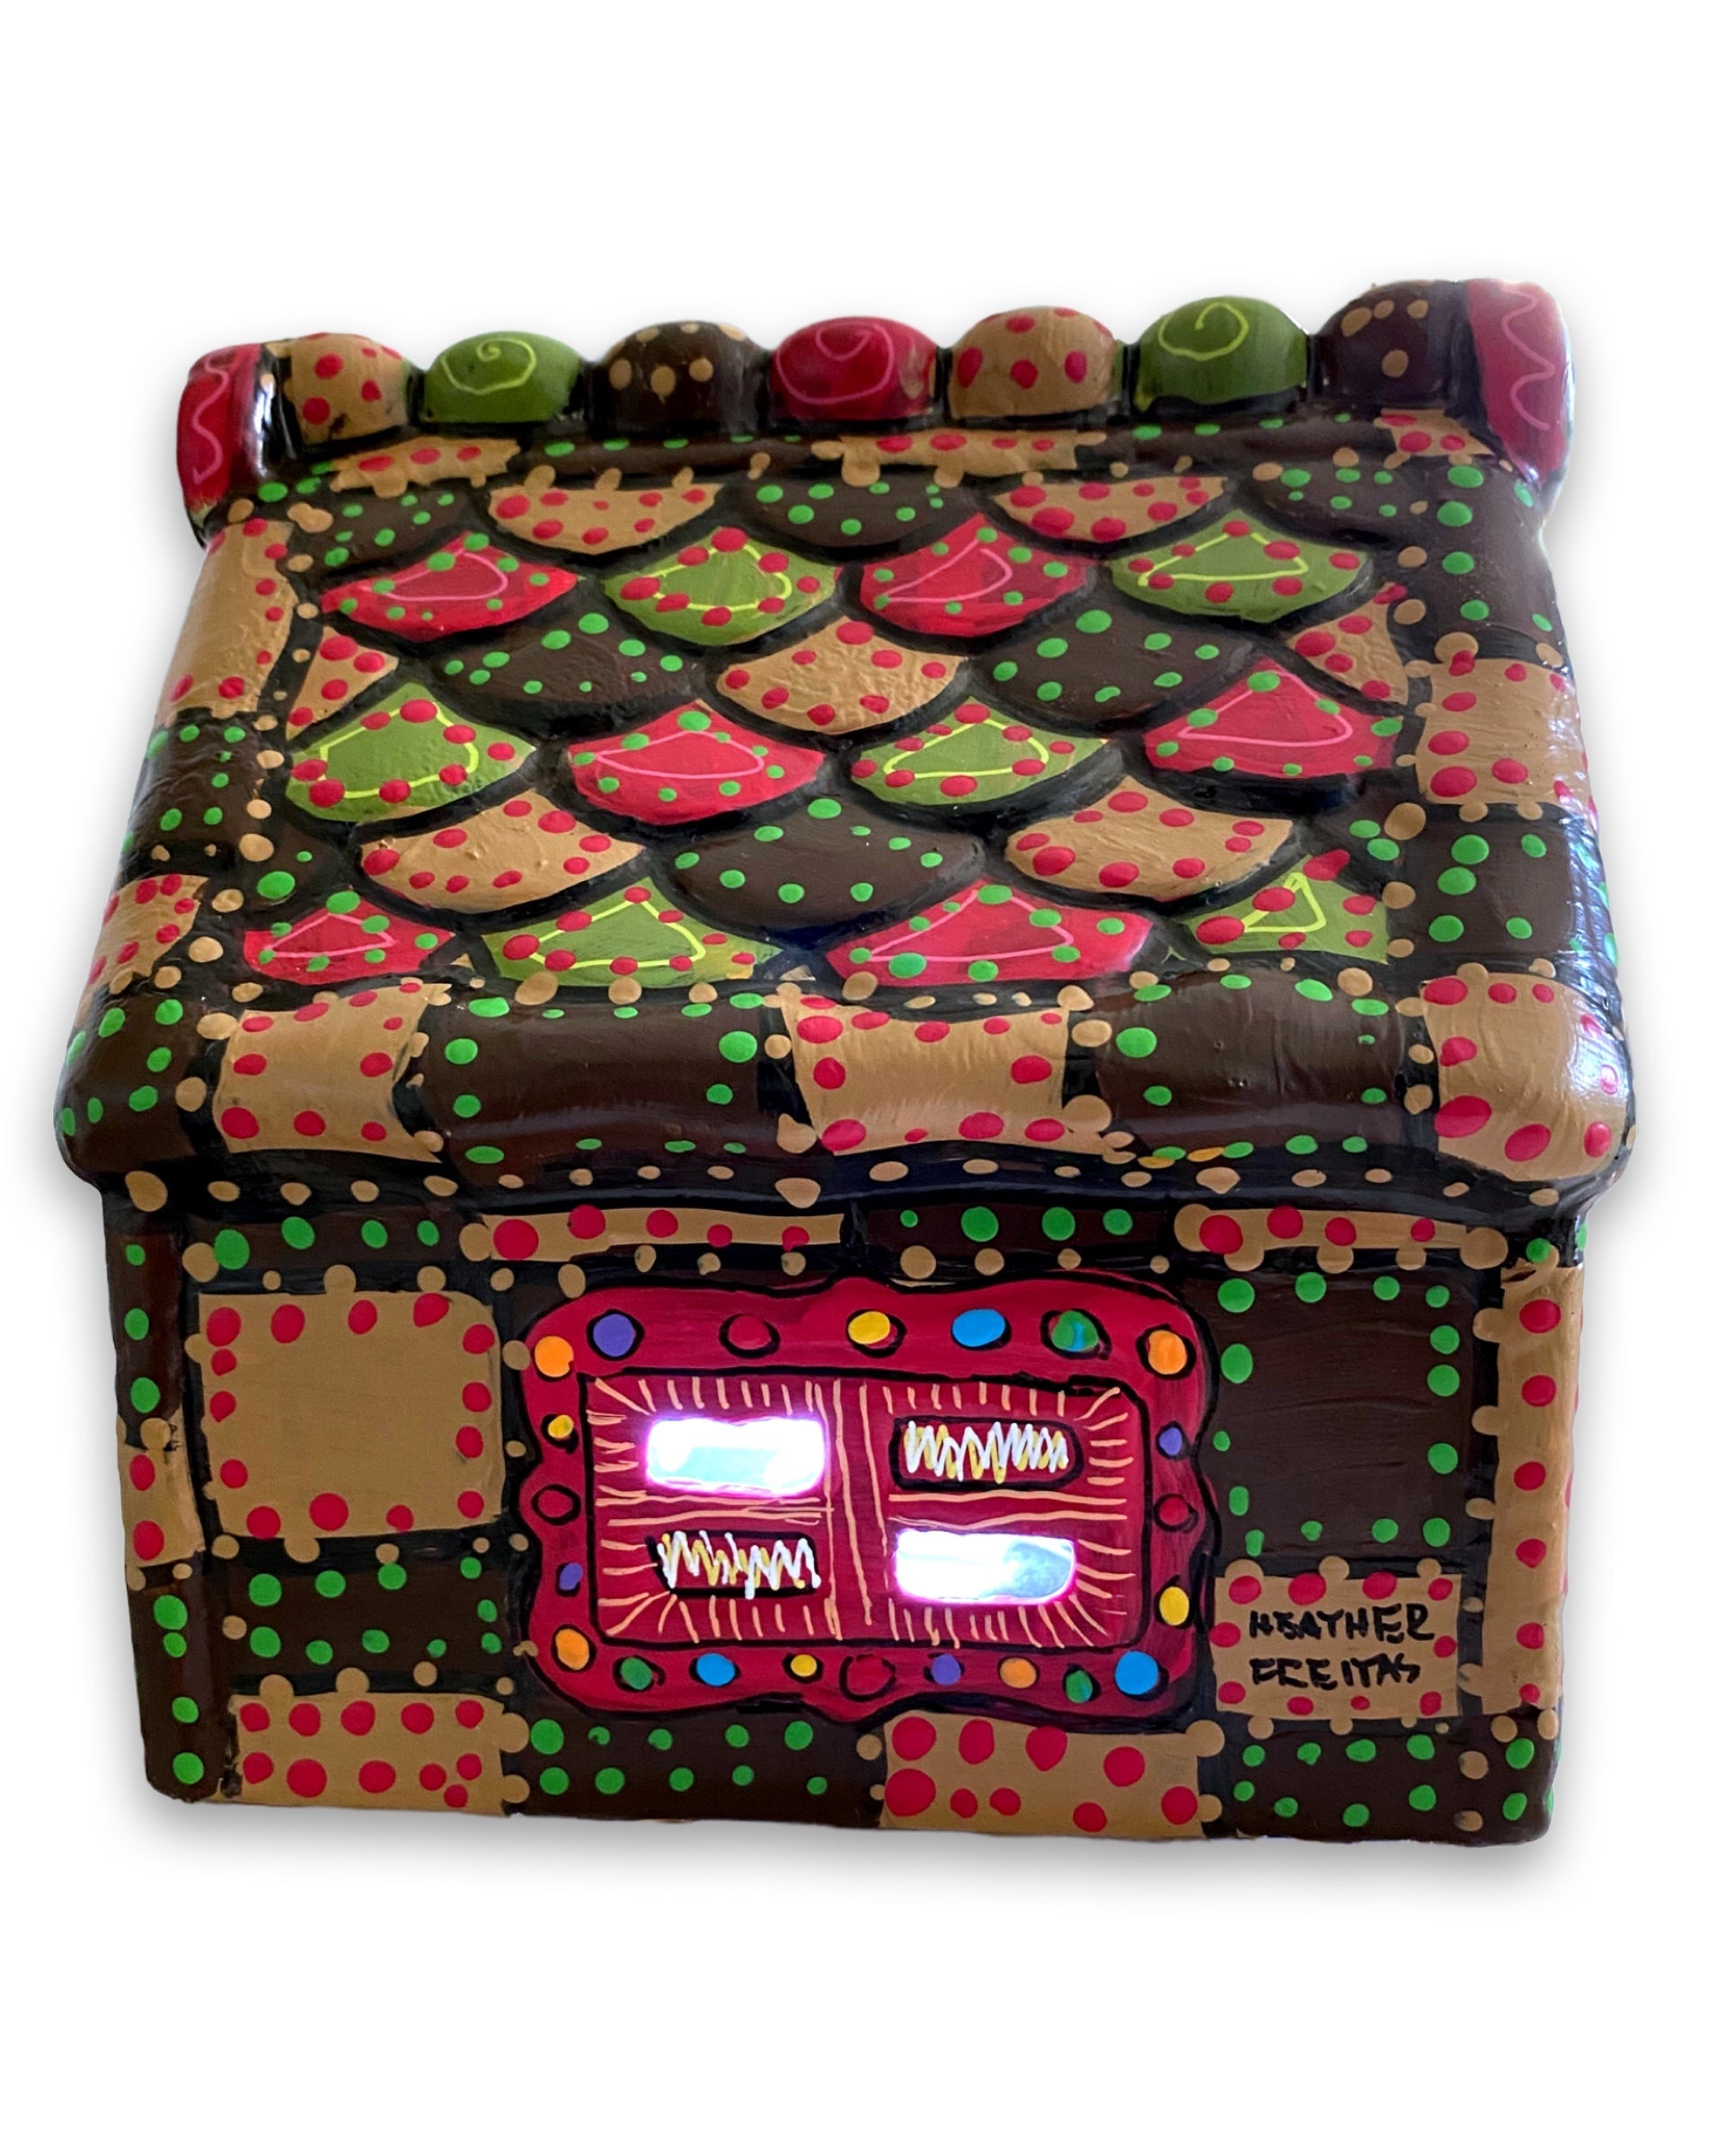 The Gingerbread House Brown & Sand Hand Painted Ceramic LED Christmas Village House - Heather Freitas 